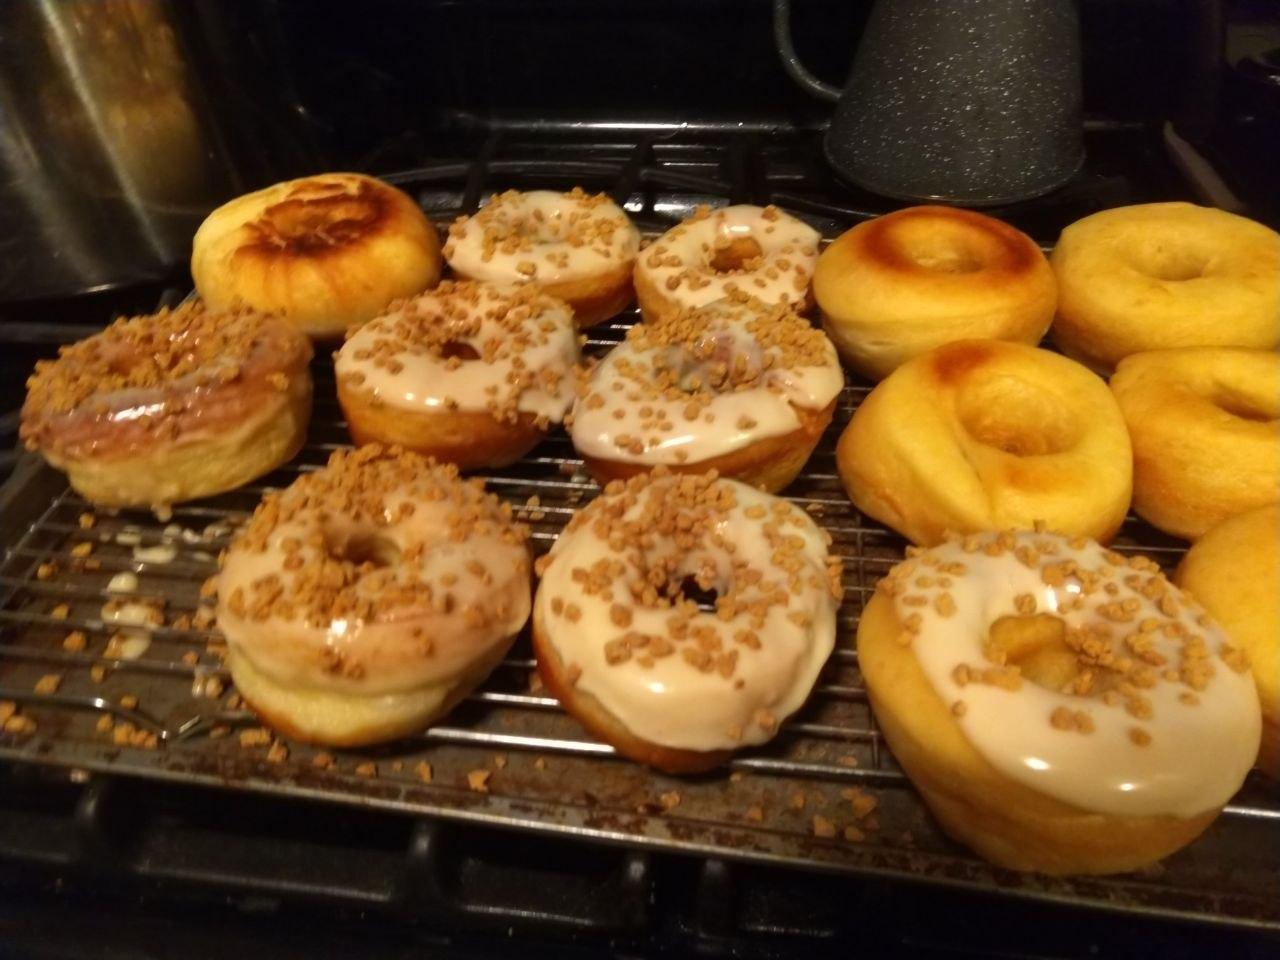 Maple glazed donuts with maple crumbles on top.